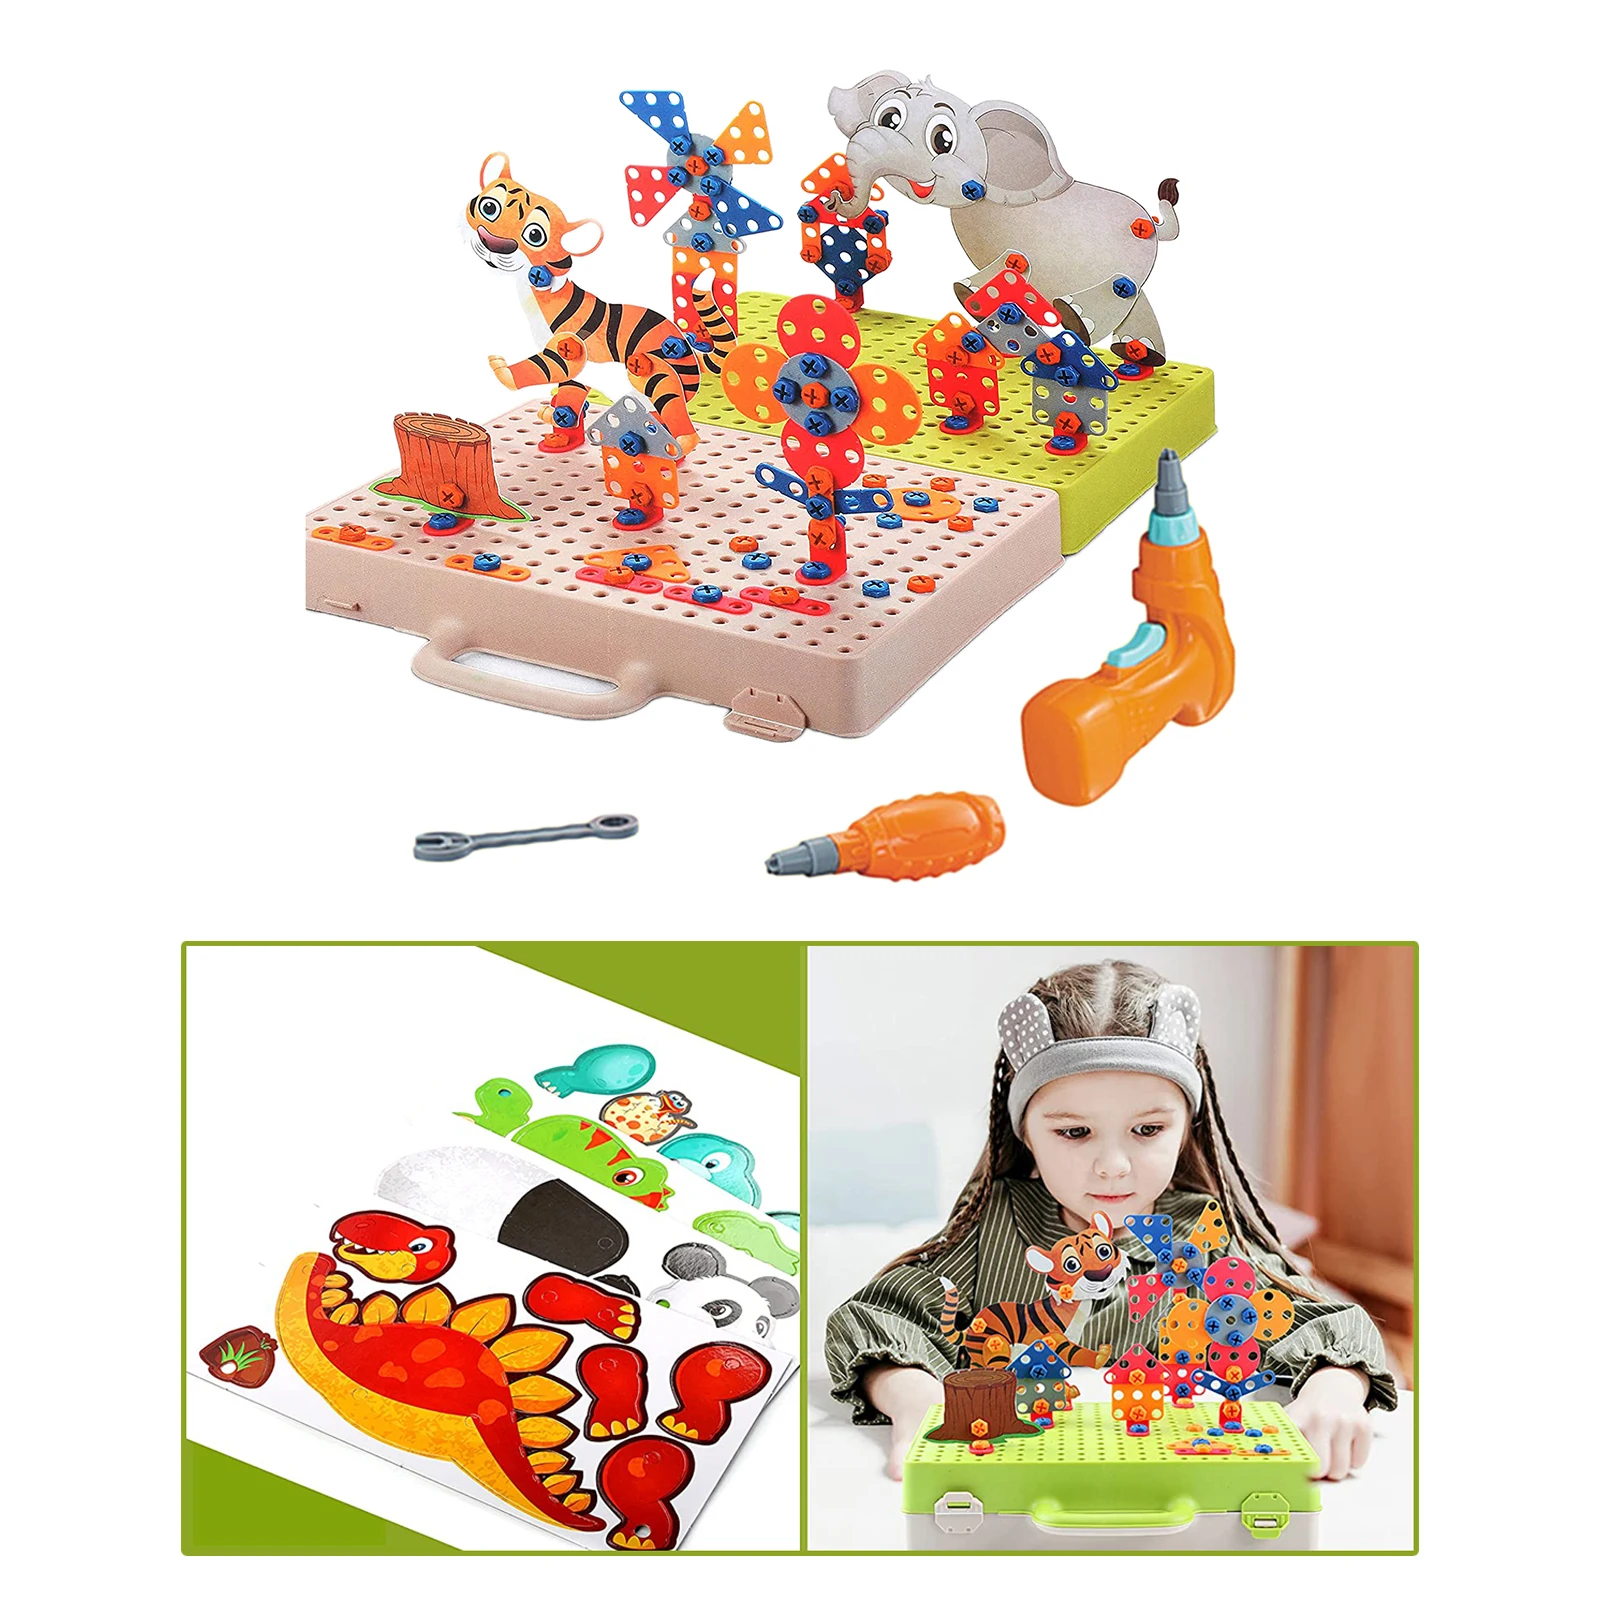 Kids Creative Children 3D Puzzle Screw Pegs Educational Toys DIY Box Gift